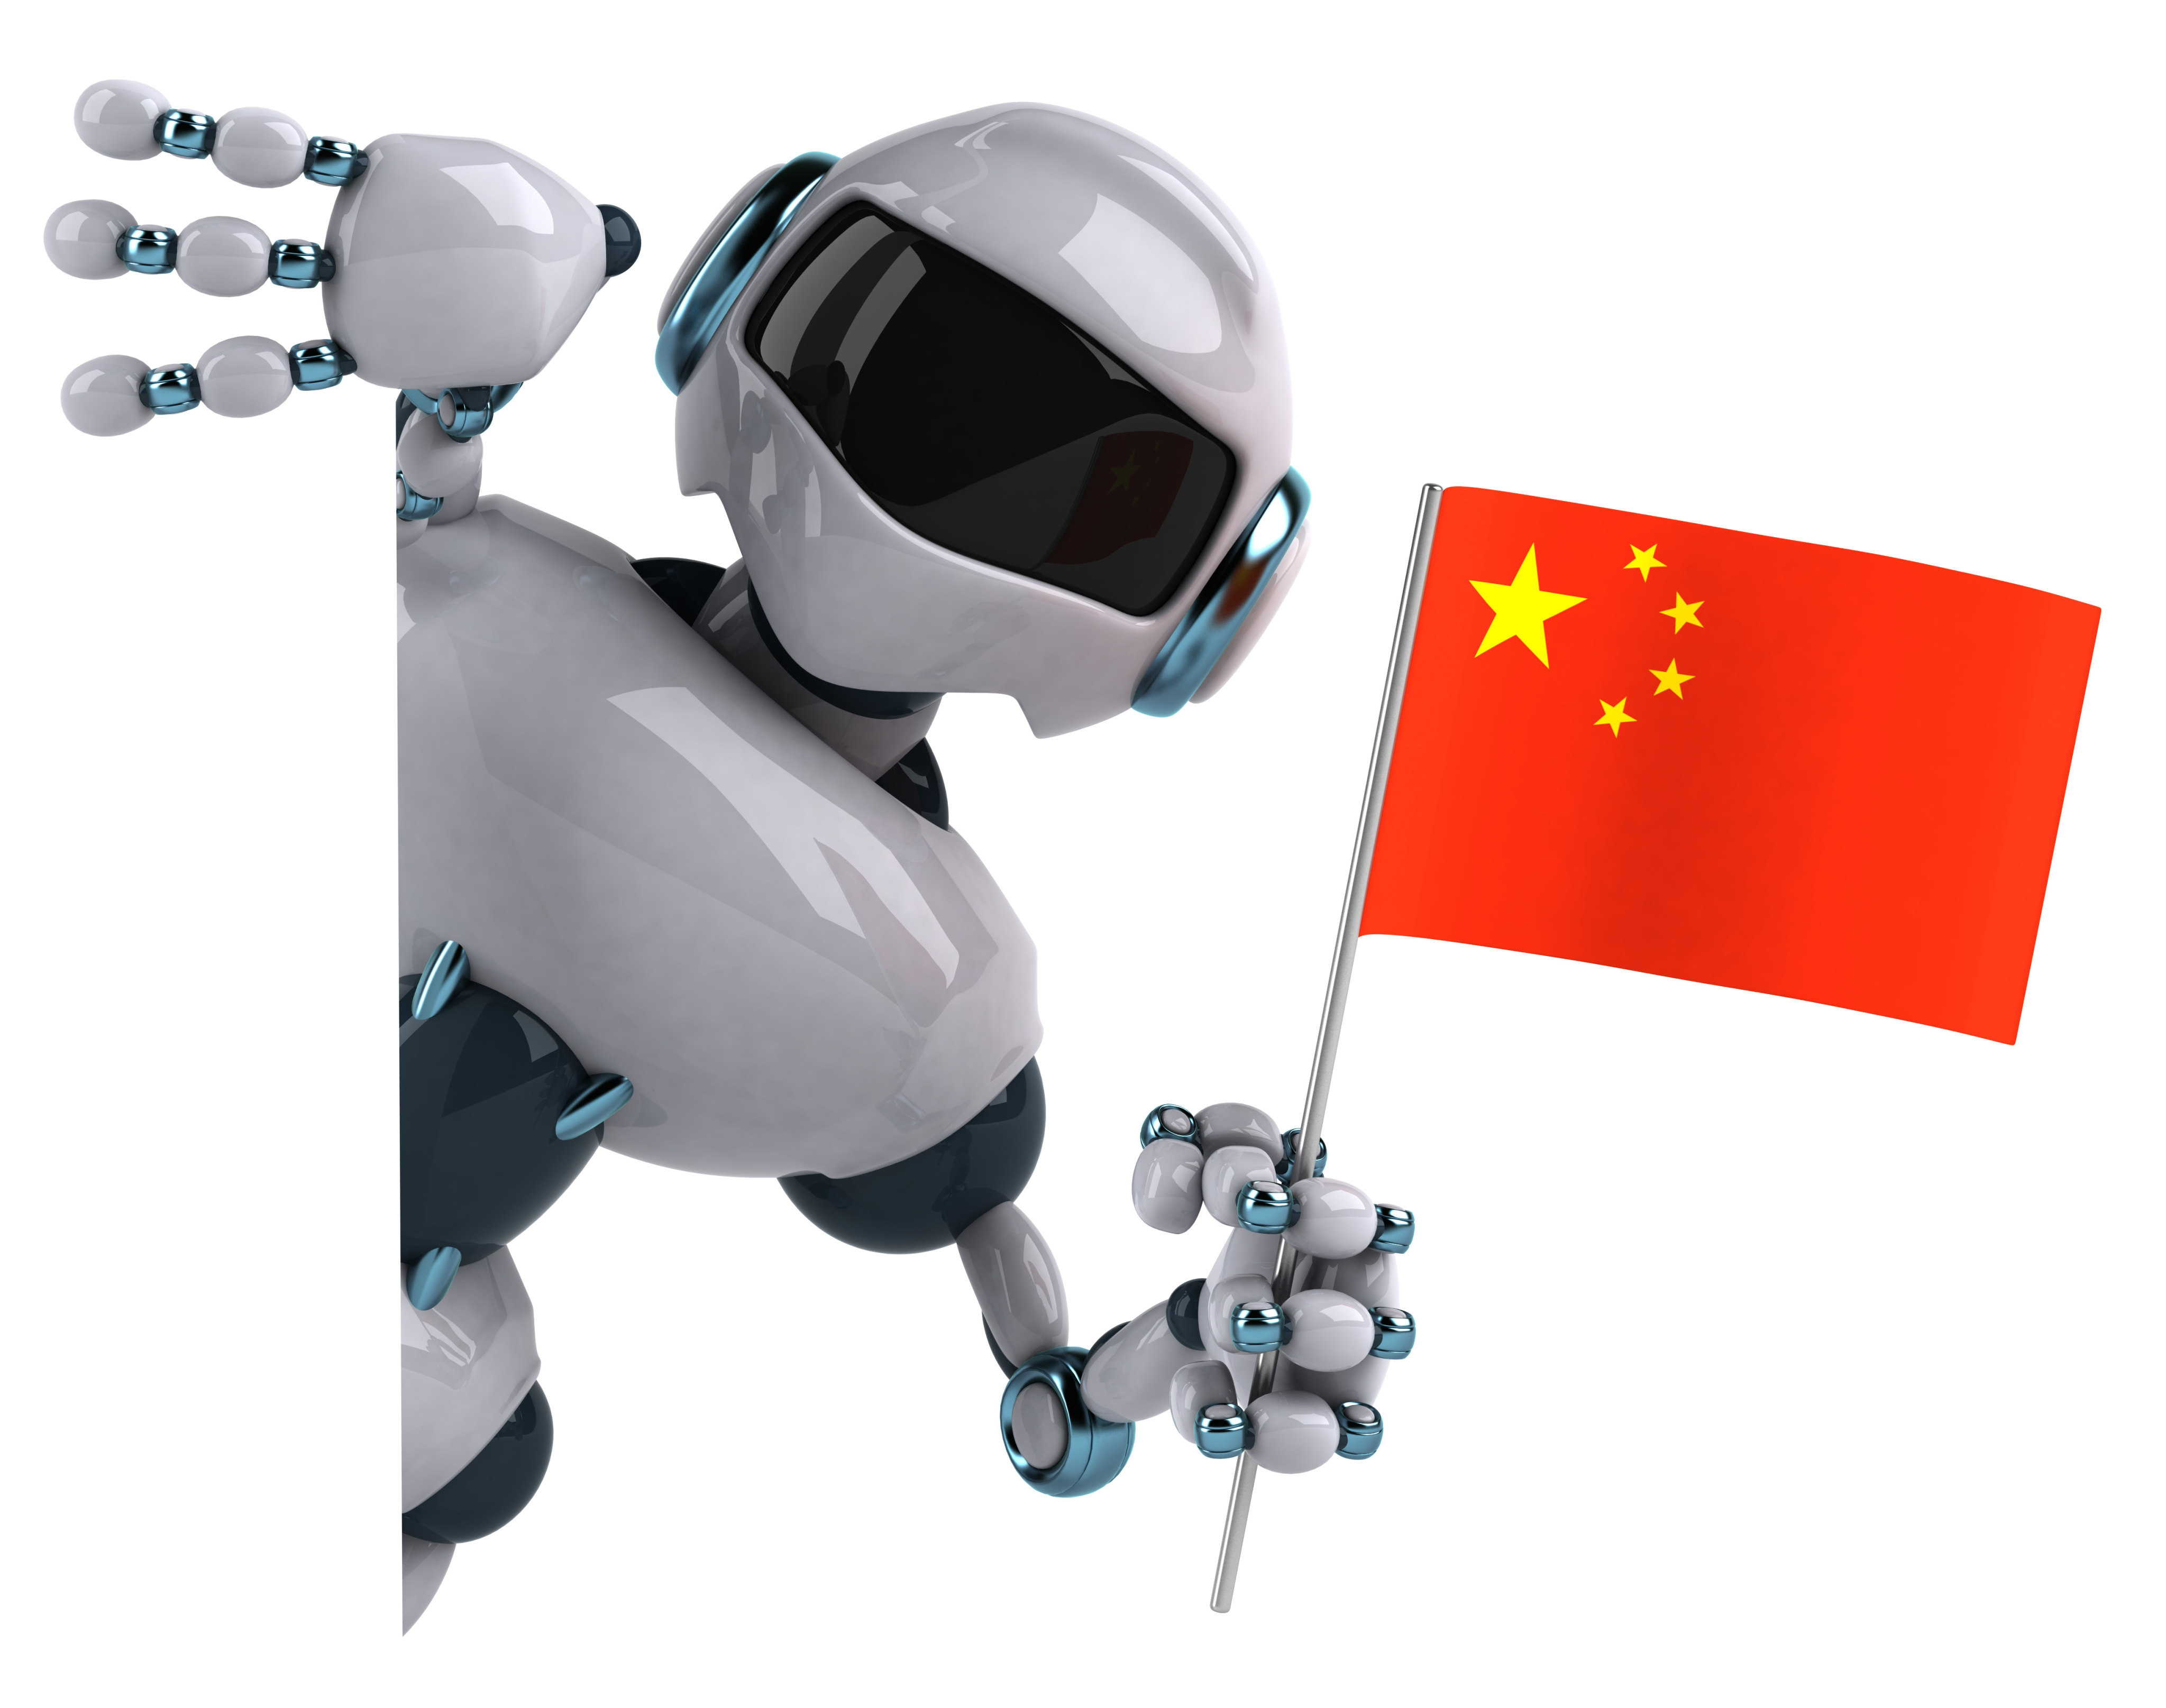 The latest tech initiative by Beijing reflects China’s commitment to use robotics to expand automation in a range of industries. Image: Shutterstock